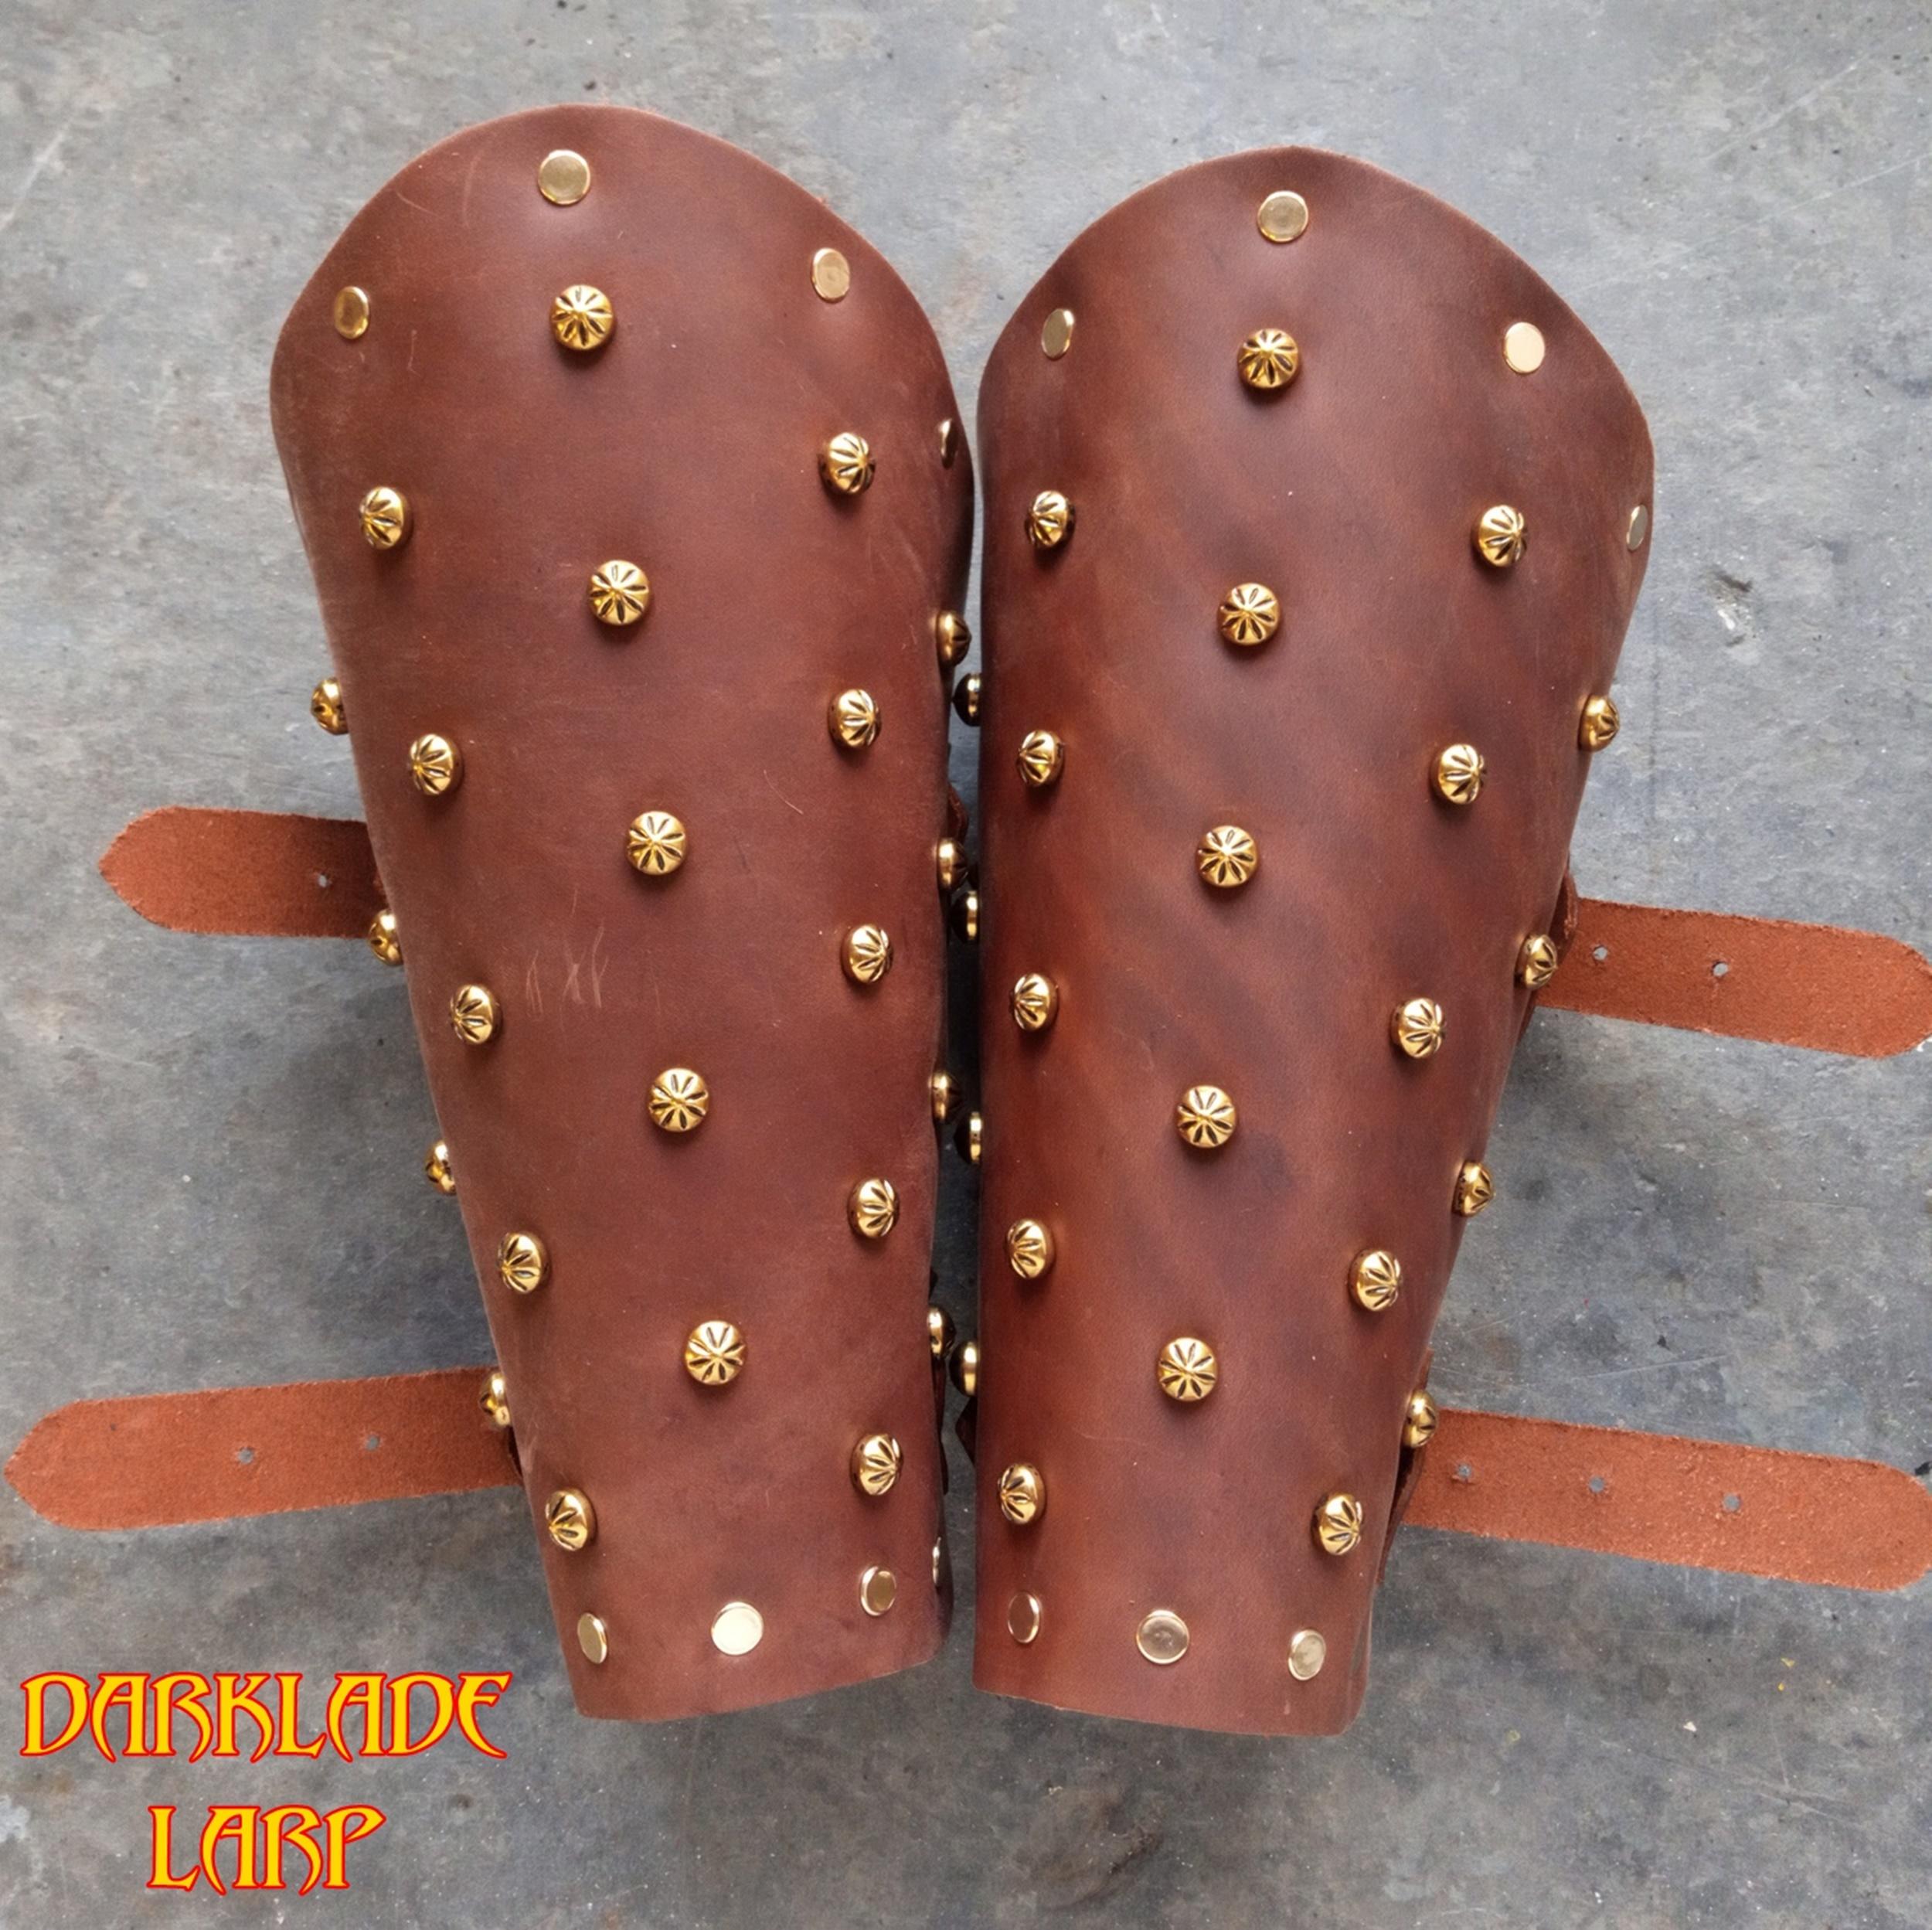 A pair of brown vambraces with onion dome rivet decoration